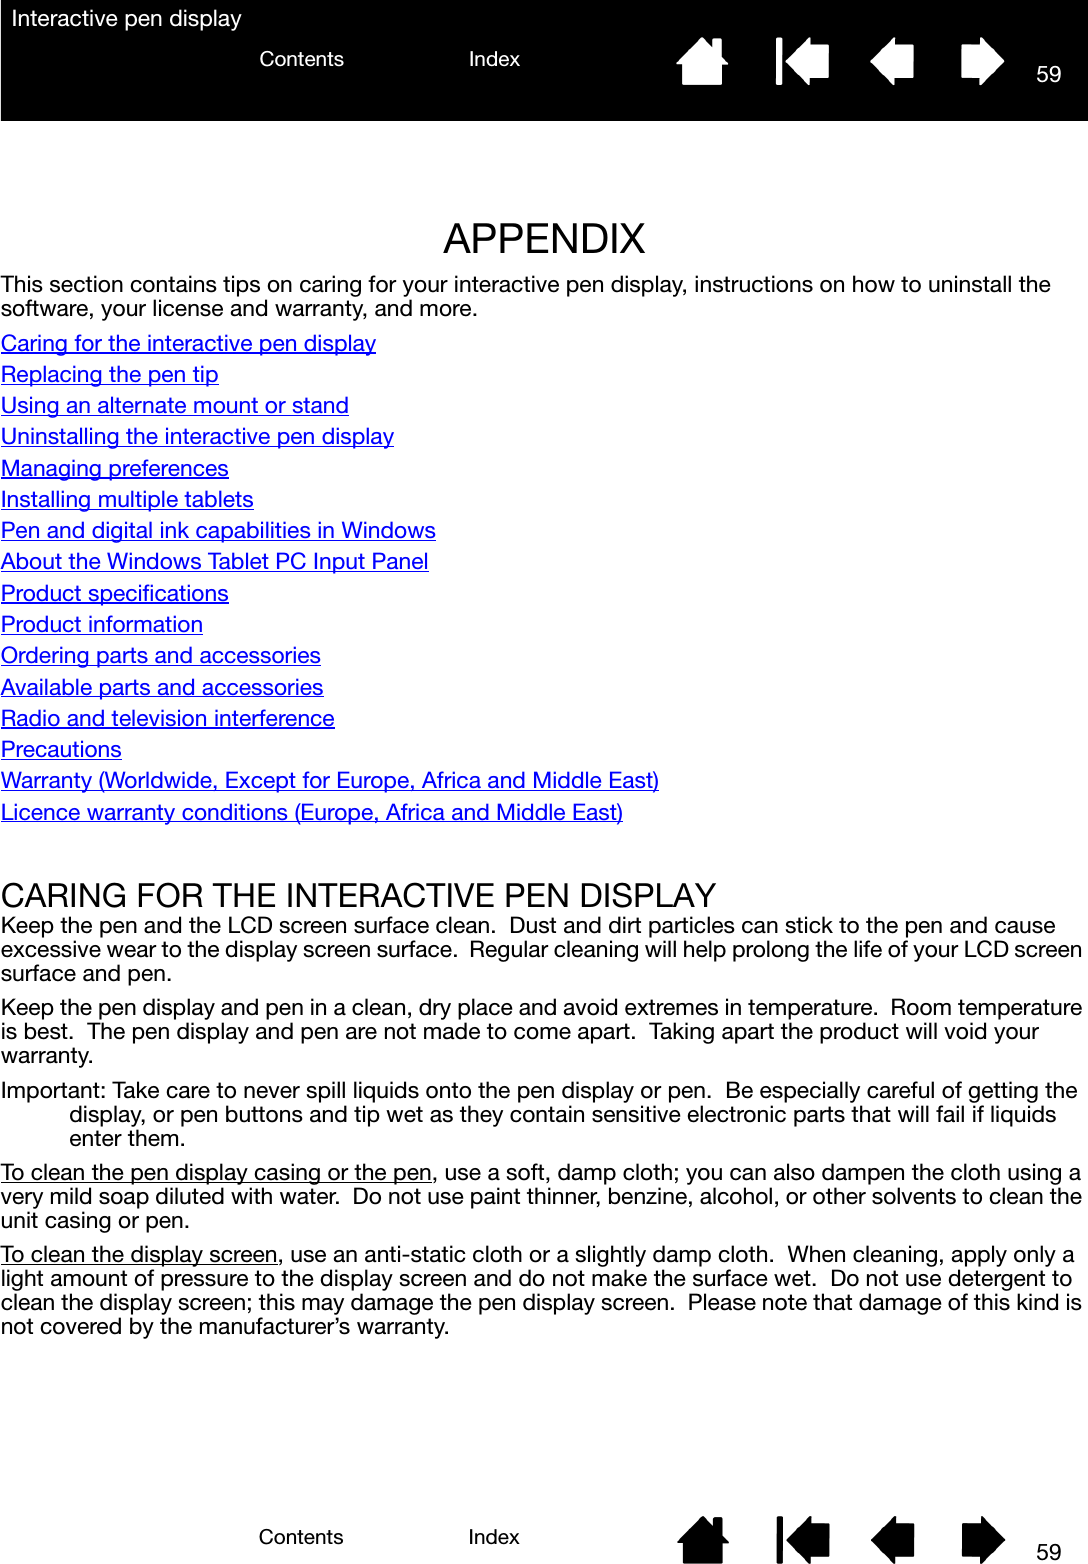 5959IndexContentsIndexContentsInteractive pen displayAPPENDIXThis section contains tips on caring for your interactive pen display, instructions on how to uninstall the software, your license and warranty, and more.Caring for the interactive pen displayReplacing the pen tipUsing an alternate mount or standUninstalling the interactive pen displayManaging preferencesInstalling multiple tabletsPen and digital ink capabilities in WindowsAbout the Windows Tablet PC Input PanelProduct specificationsProduct informationOrdering parts and accessoriesAvailable parts and accessoriesRadio and television interferencePrecautionsWarranty (Worldwide, Except for Europe, Africa and Middle East)Licence warranty conditions (Europe, Africa and Middle East)CARING FOR THE INTERACTIVE PEN DISPLAYKeep the pen and the LCD screen surface clean.  Dust and dirt particles can stick to the pen and cause excessive wear to the display screen surface.  Regular cleaning will help prolong the life of your LCD screen surface and pen.  Keep the pen display and pen in a clean, dry place and avoid extremes in temperature.  Room temperature is best.  The pen display and pen are not made to come apart.  Taking apart the product will void your warranty.Important: Take care to never spill liquids onto the pen display or pen.  Be especially careful of getting the display, or pen buttons and tip wet as they contain sensitive electronic parts that will fail if liquids enter them.To clean the pen display casing or the pen, use a soft, damp cloth; you can also dampen the cloth using a very mild soap diluted with water.  Do not use paint thinner, benzine, alcohol, or other solvents to clean the unit casing or pen.To clean the display screen, use an anti-static cloth or a slightly damp cloth.  When cleaning, apply only a light amount of pressure to the display screen and do not make the surface wet.  Do not use detergent to clean the display screen; this may damage the pen display screen.  Please note that damage of this kind is not covered by the manufacturer’s warranty.